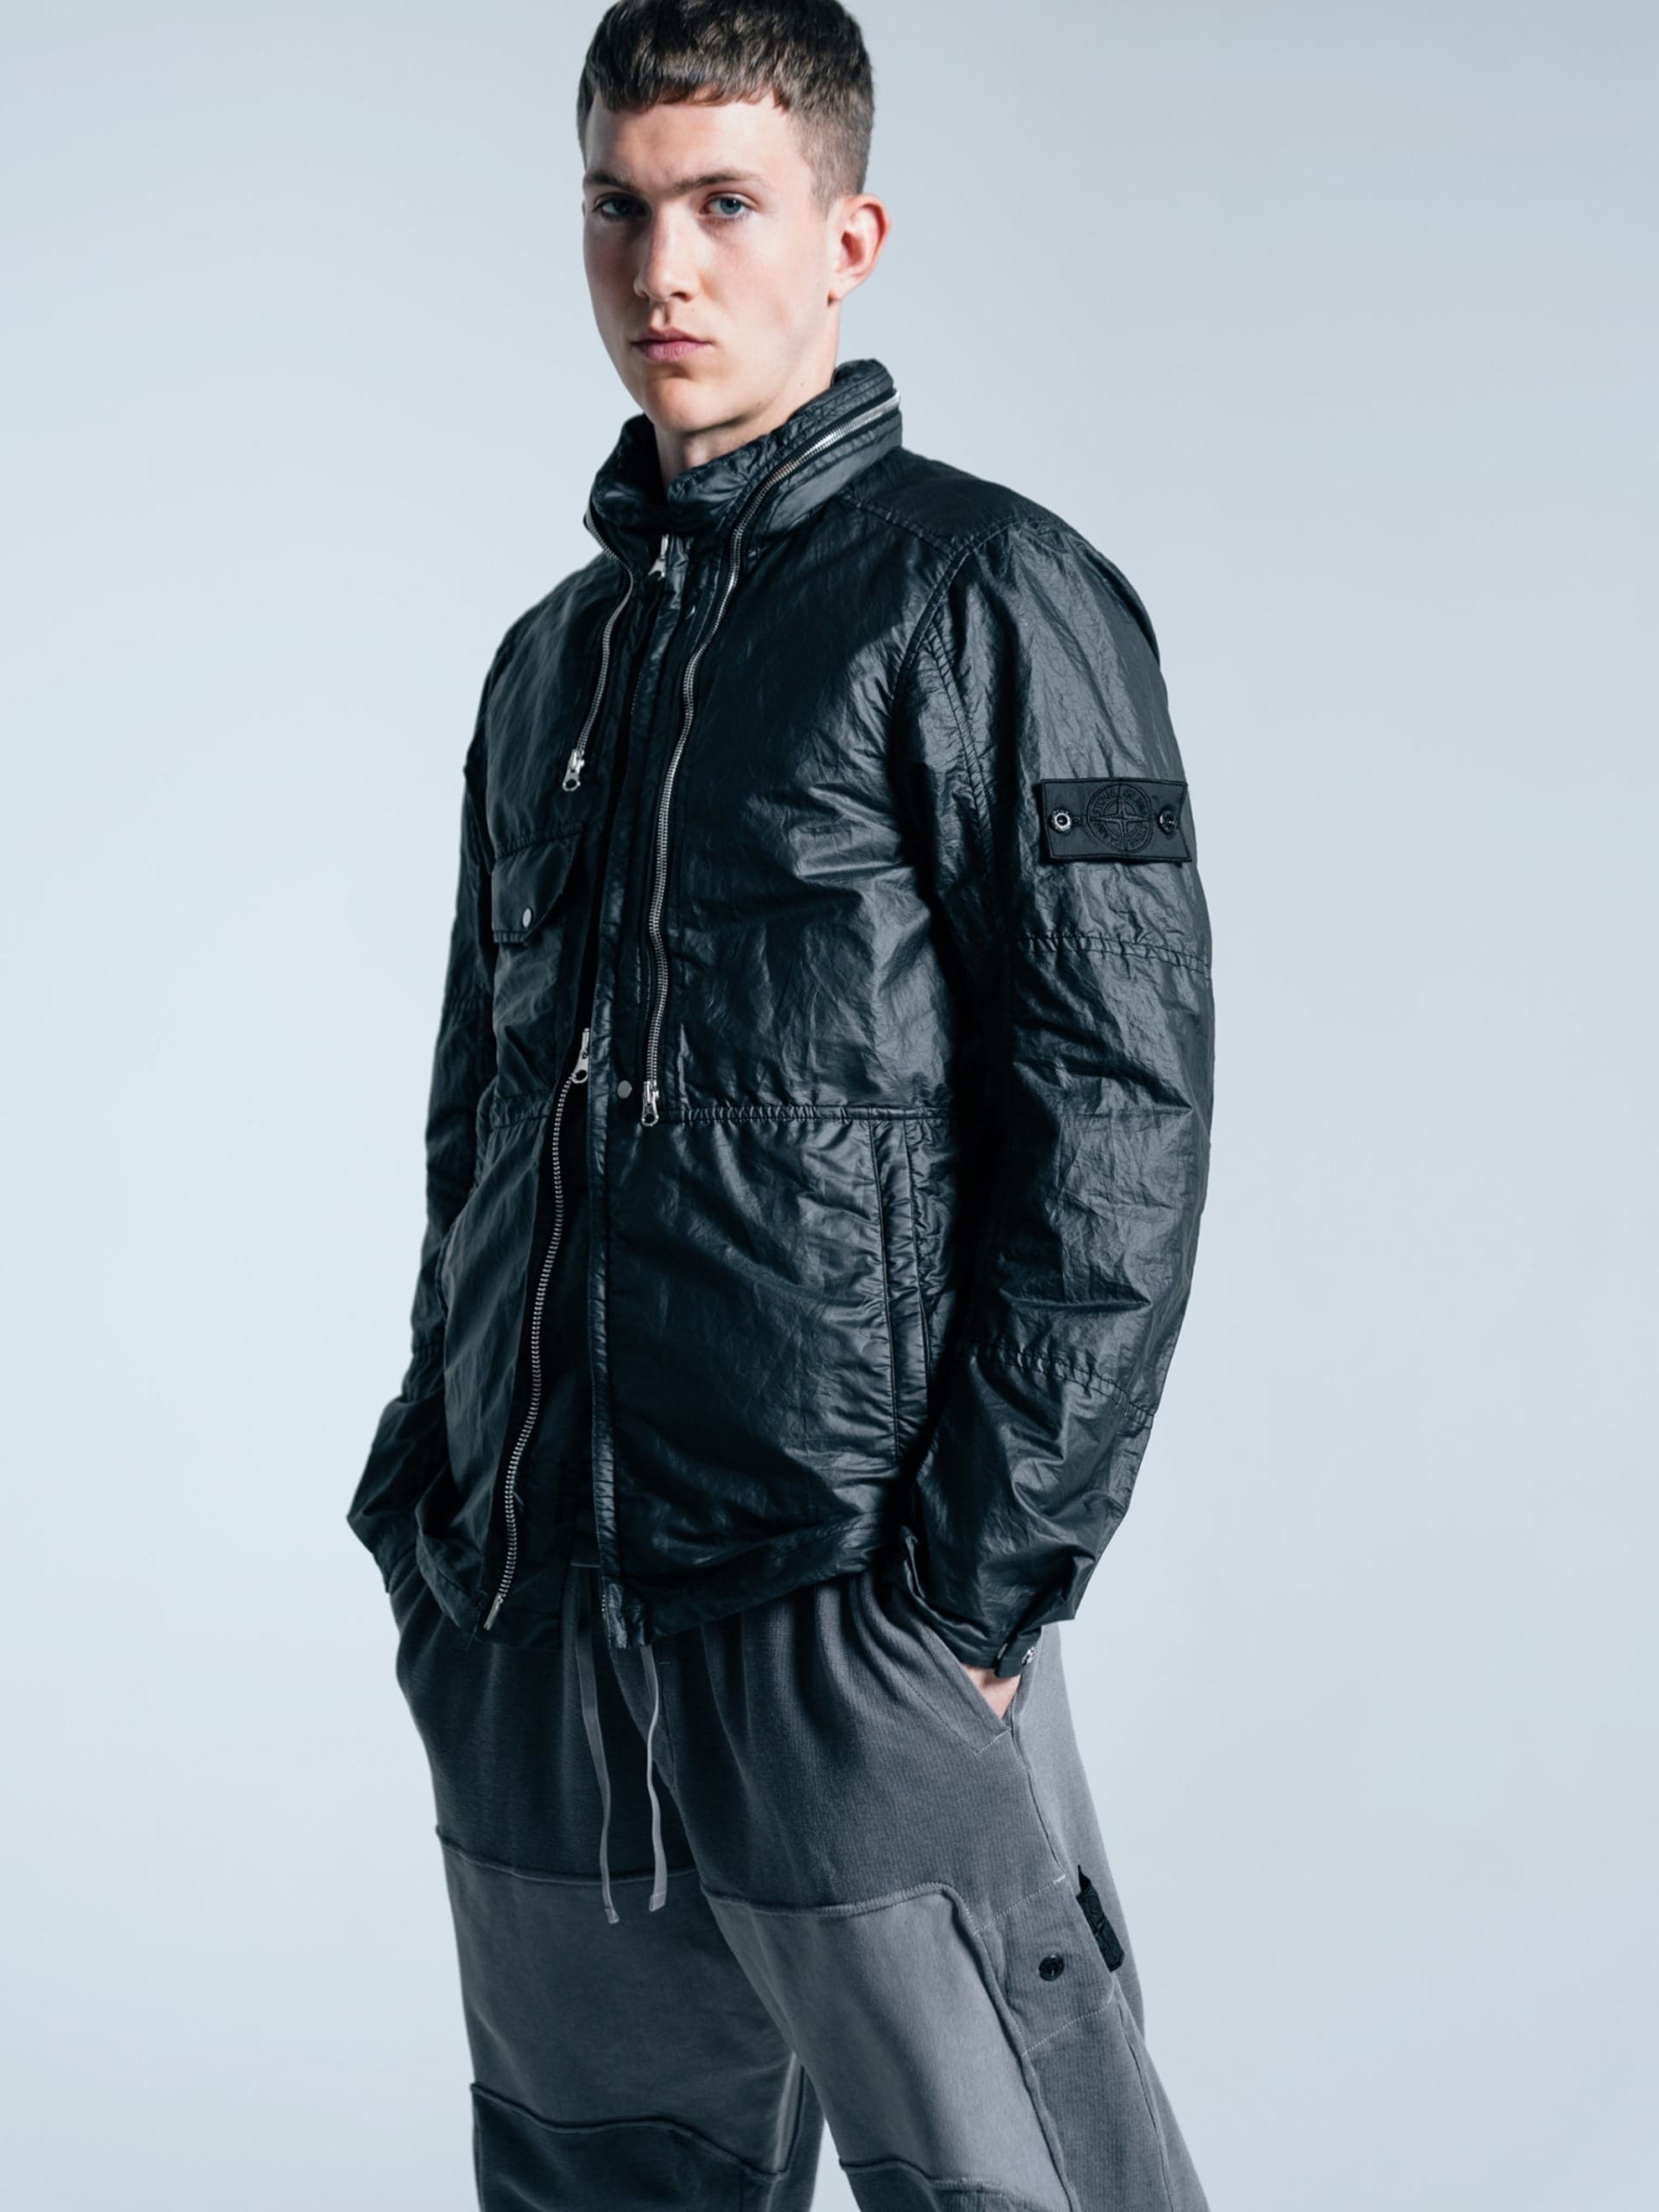 editorial haven stone island shadow project ss20 2